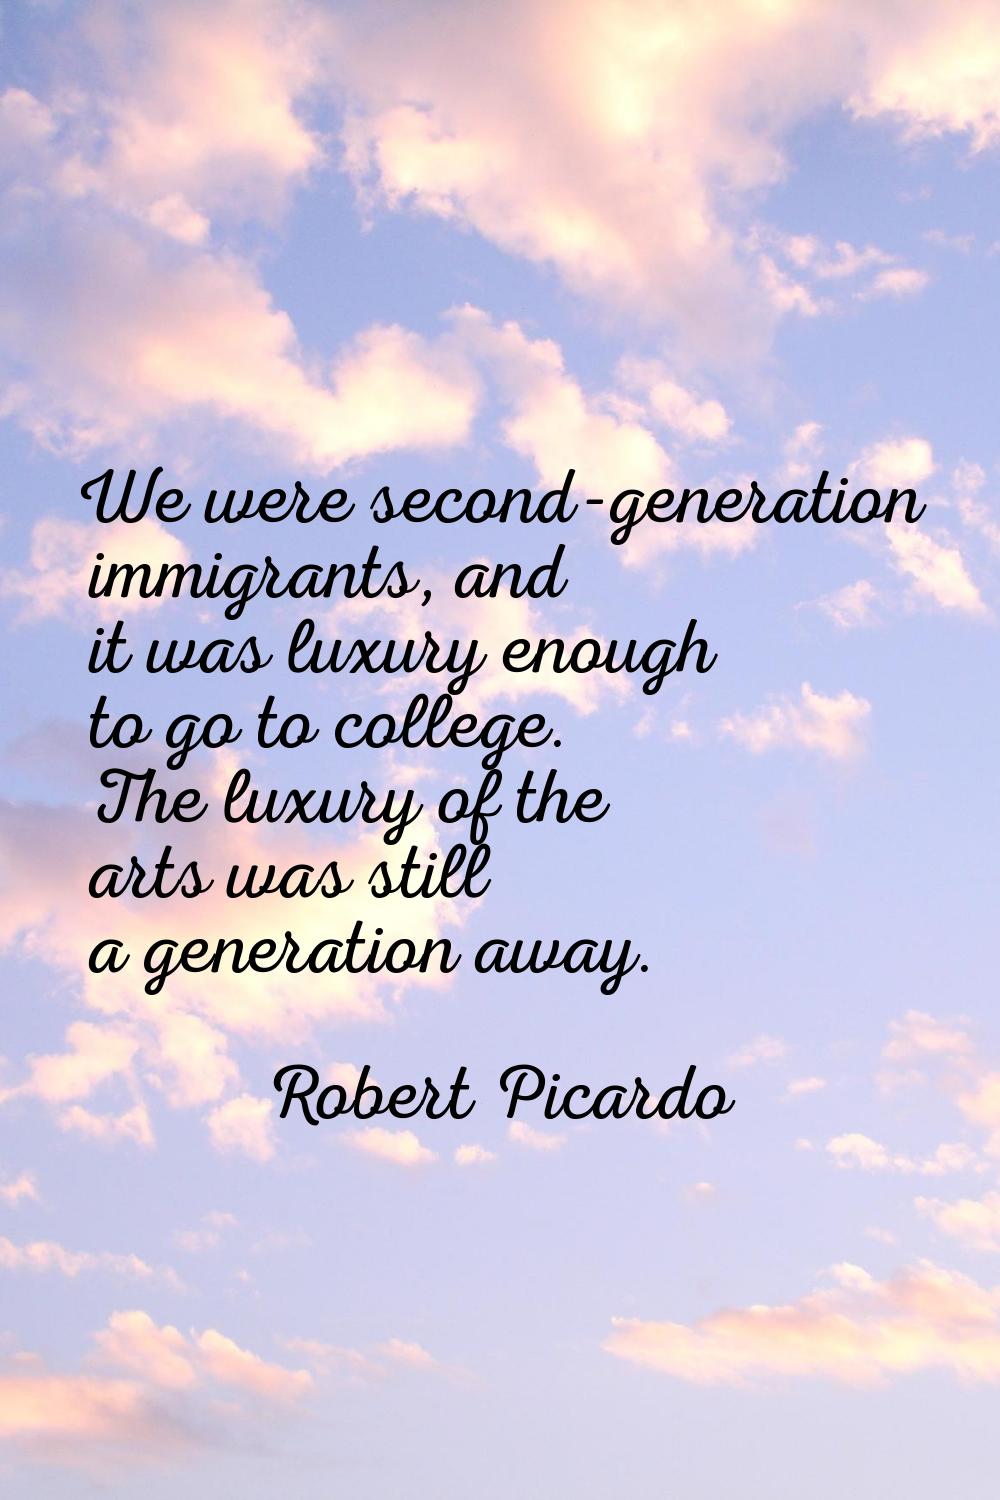 We were second-generation immigrants, and it was luxury enough to go to college. The luxury of the 